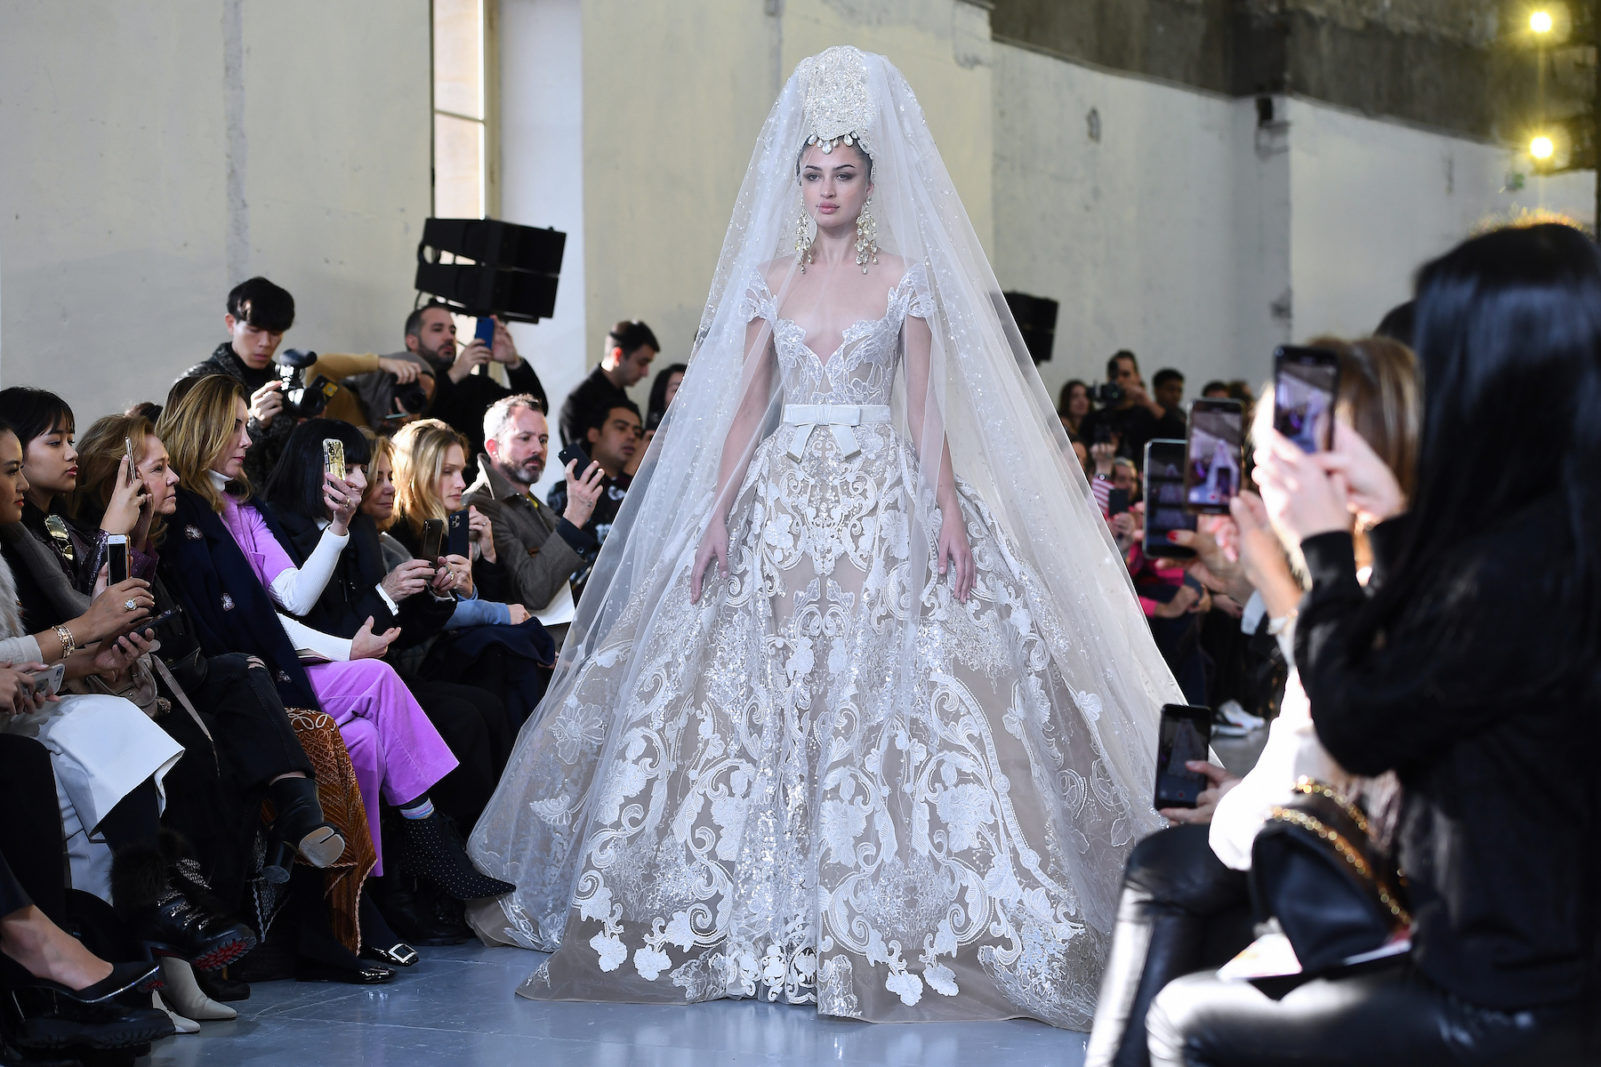 The Most Beautiful Wedding Dresses at Haute Couture Week 2020